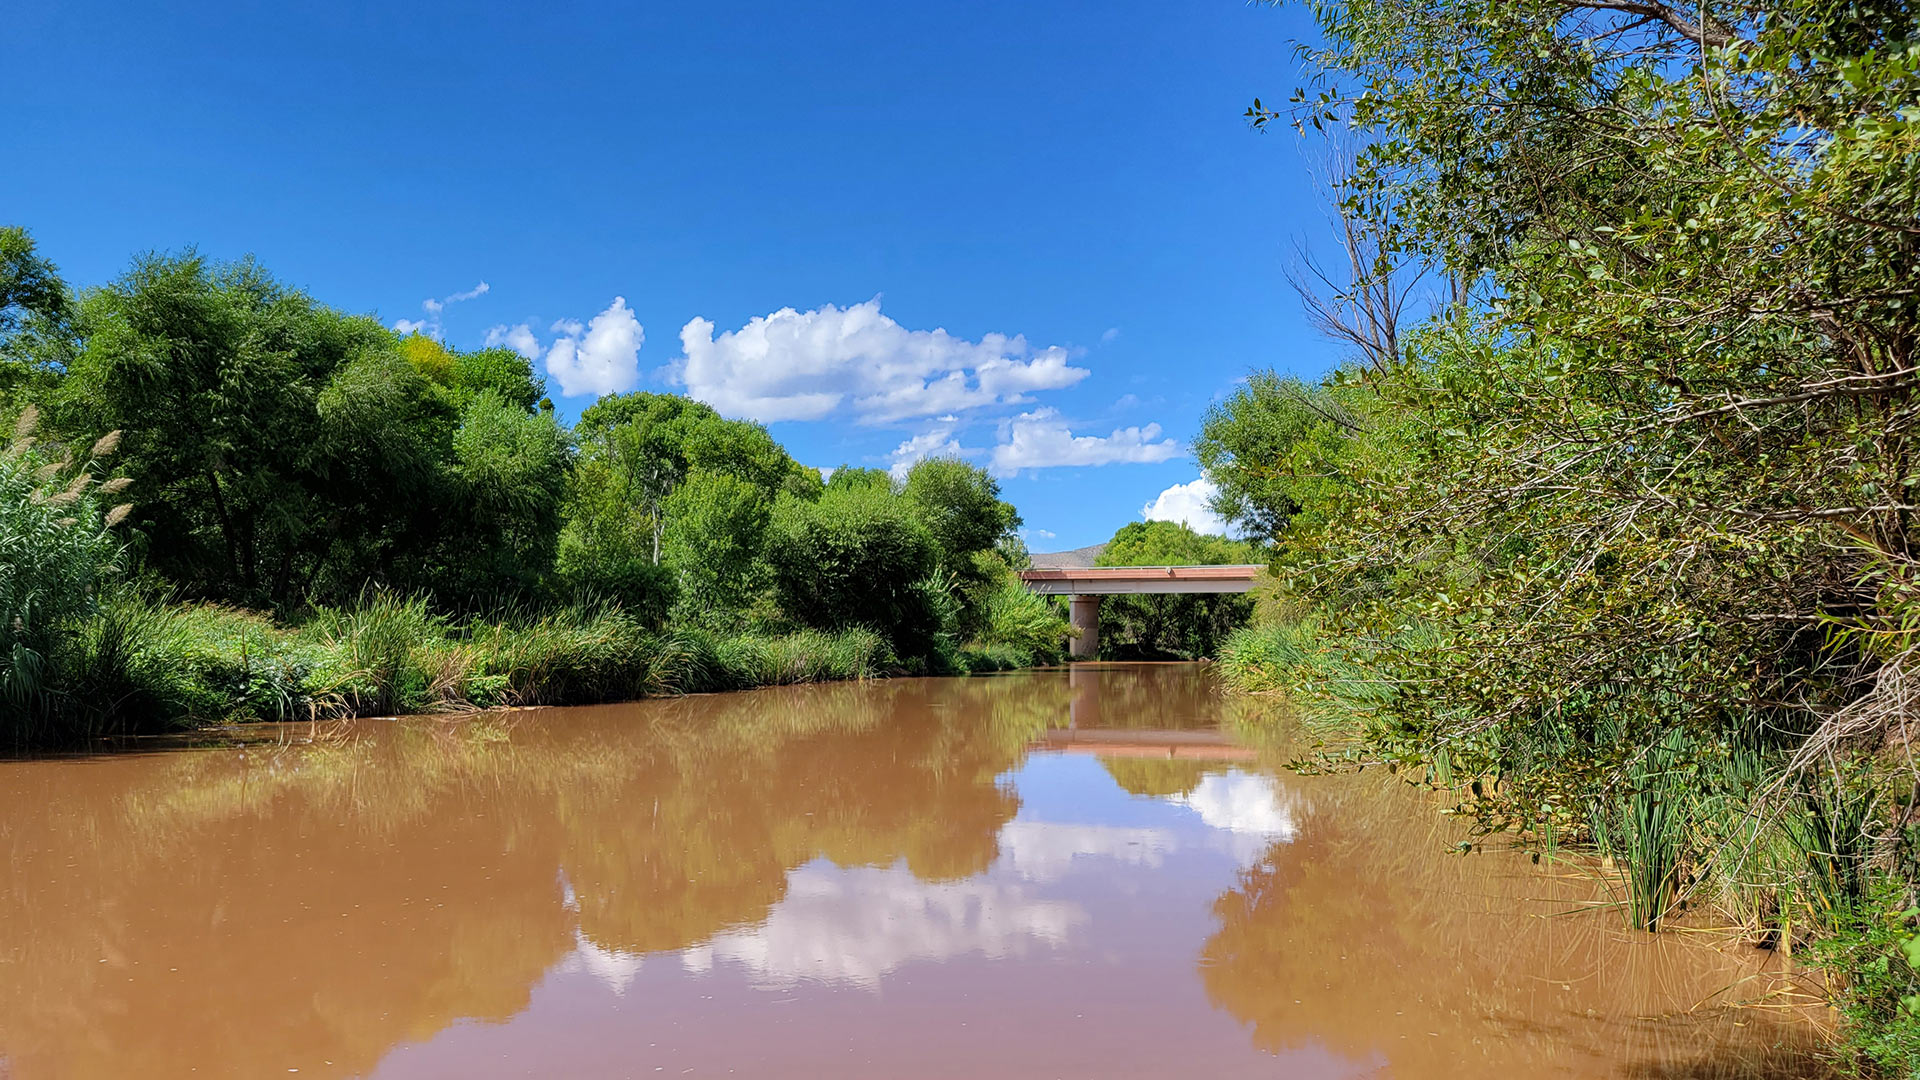 The Buzz takes a trip down the Verde River